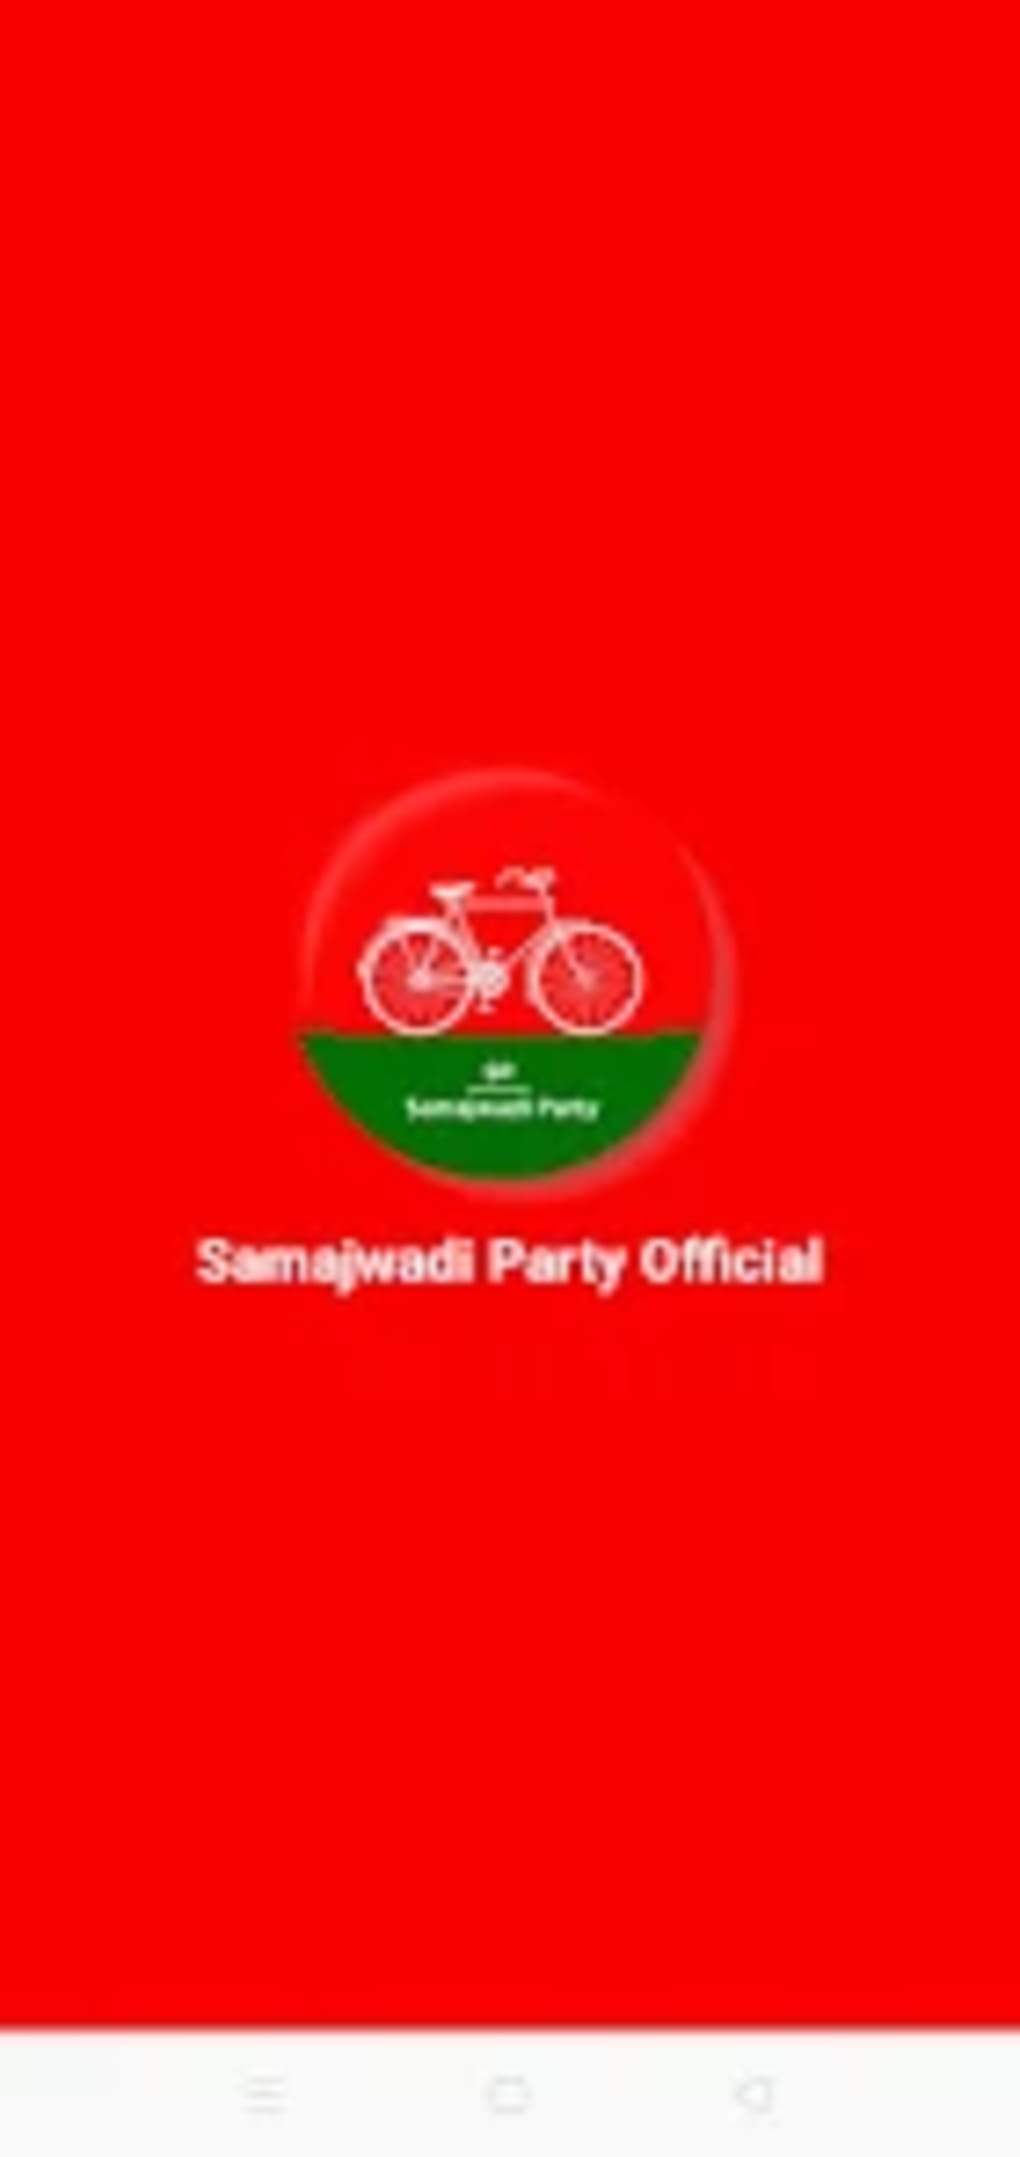 104 Samajwadi Party Images, Stock Photos, 3D objects, & Vectors |  Shutterstock